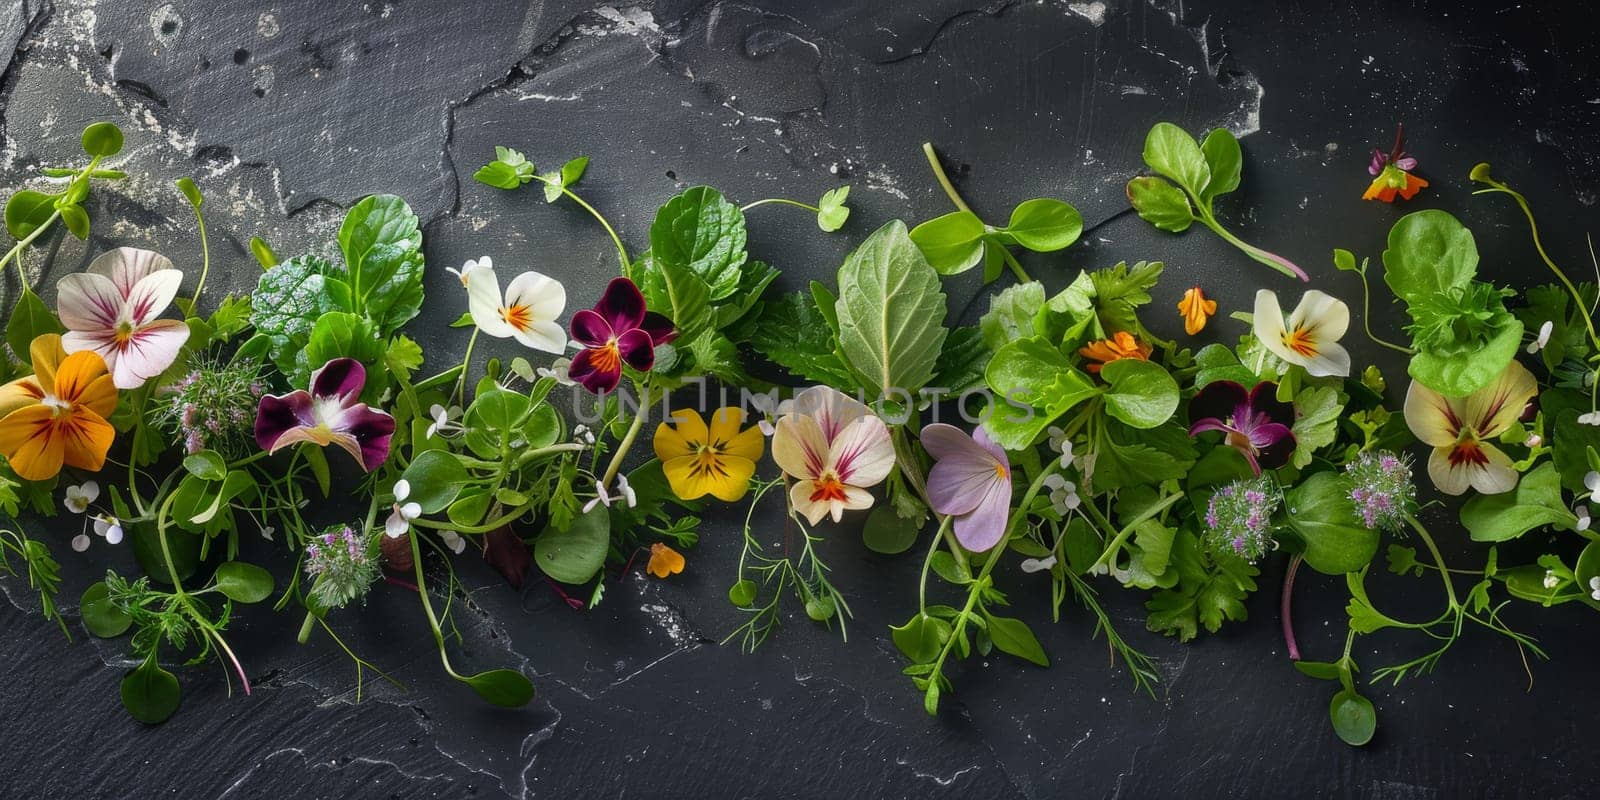 Garnishes and decorations used in a gourmet cuisine, such as microgreens, edible flowers, or delicate herb leaves